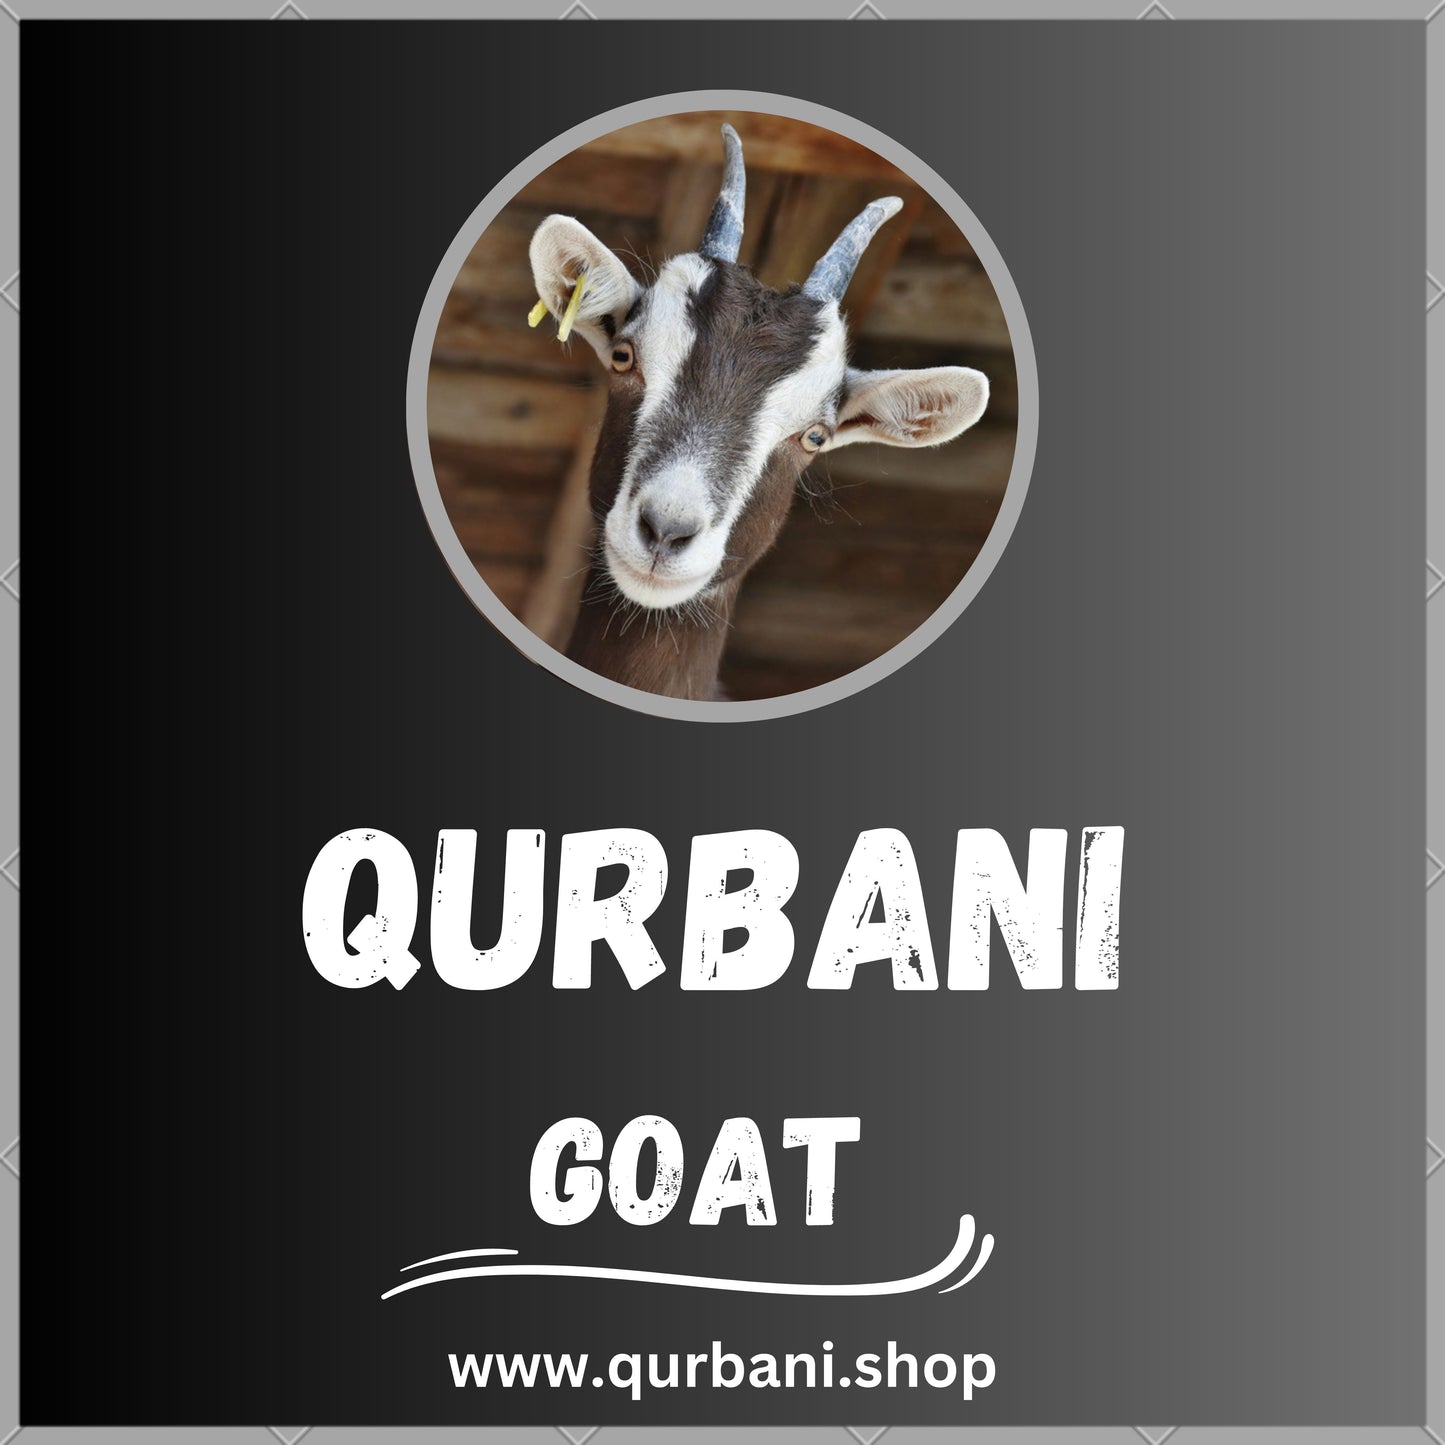 Make a Difference: Qurbani Donation for a Worthy Cause